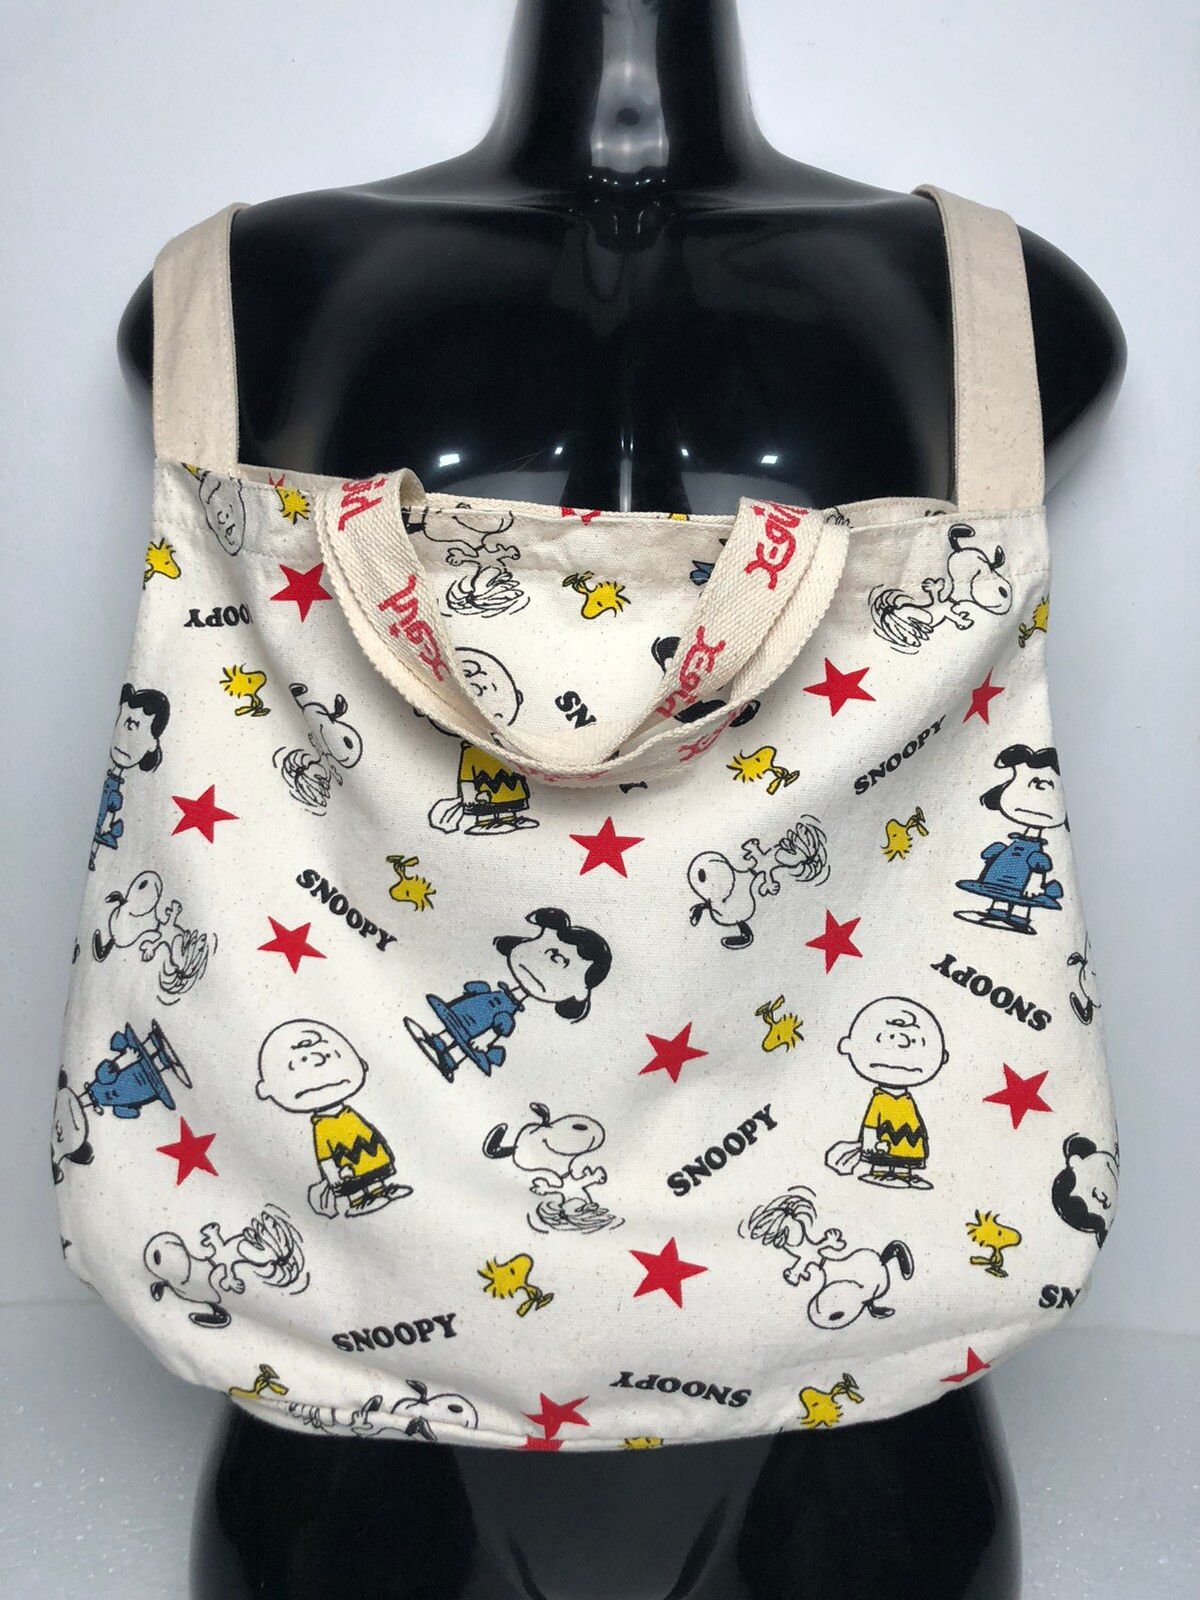 Vintage Peanuts x xgirl snoopy tote bag Size ONE SIZE - 1 Preview